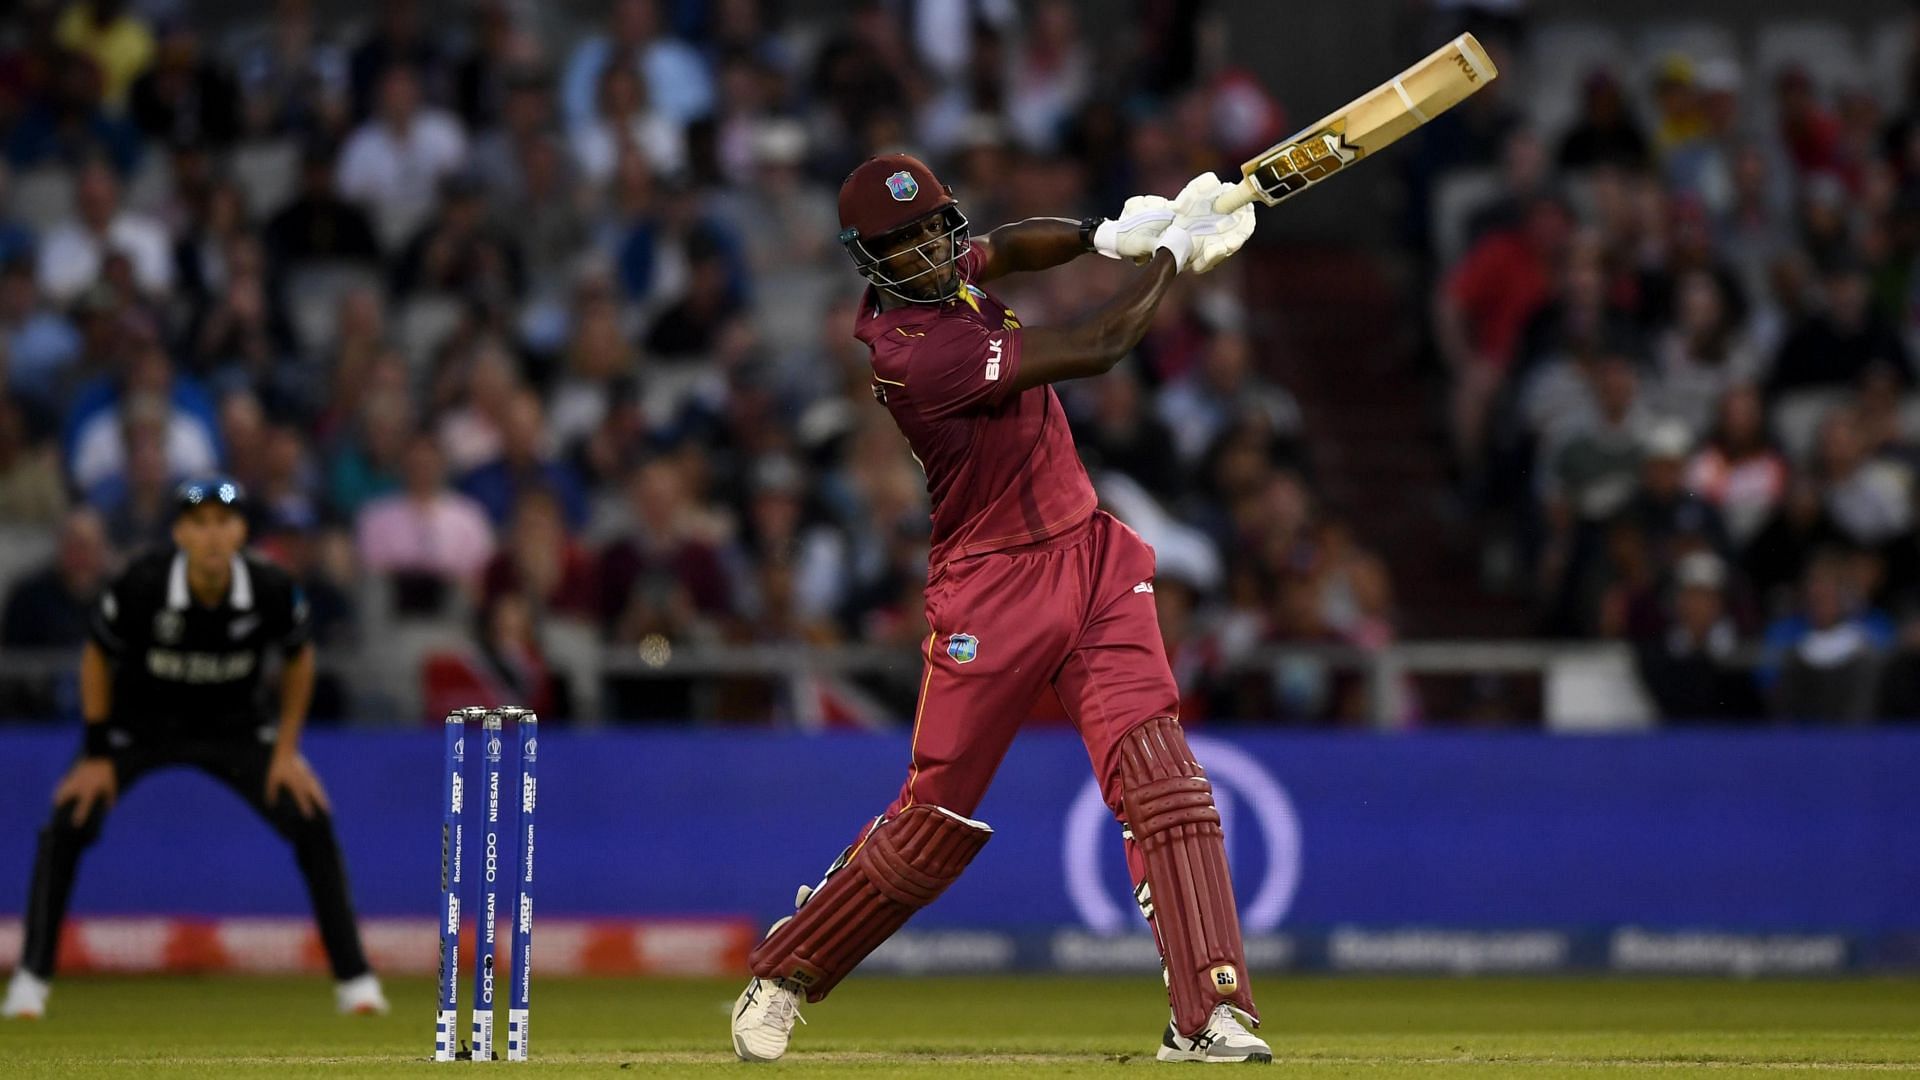 Despite having the talent, Carlos Brathwaite never could leave a mark in the IPL